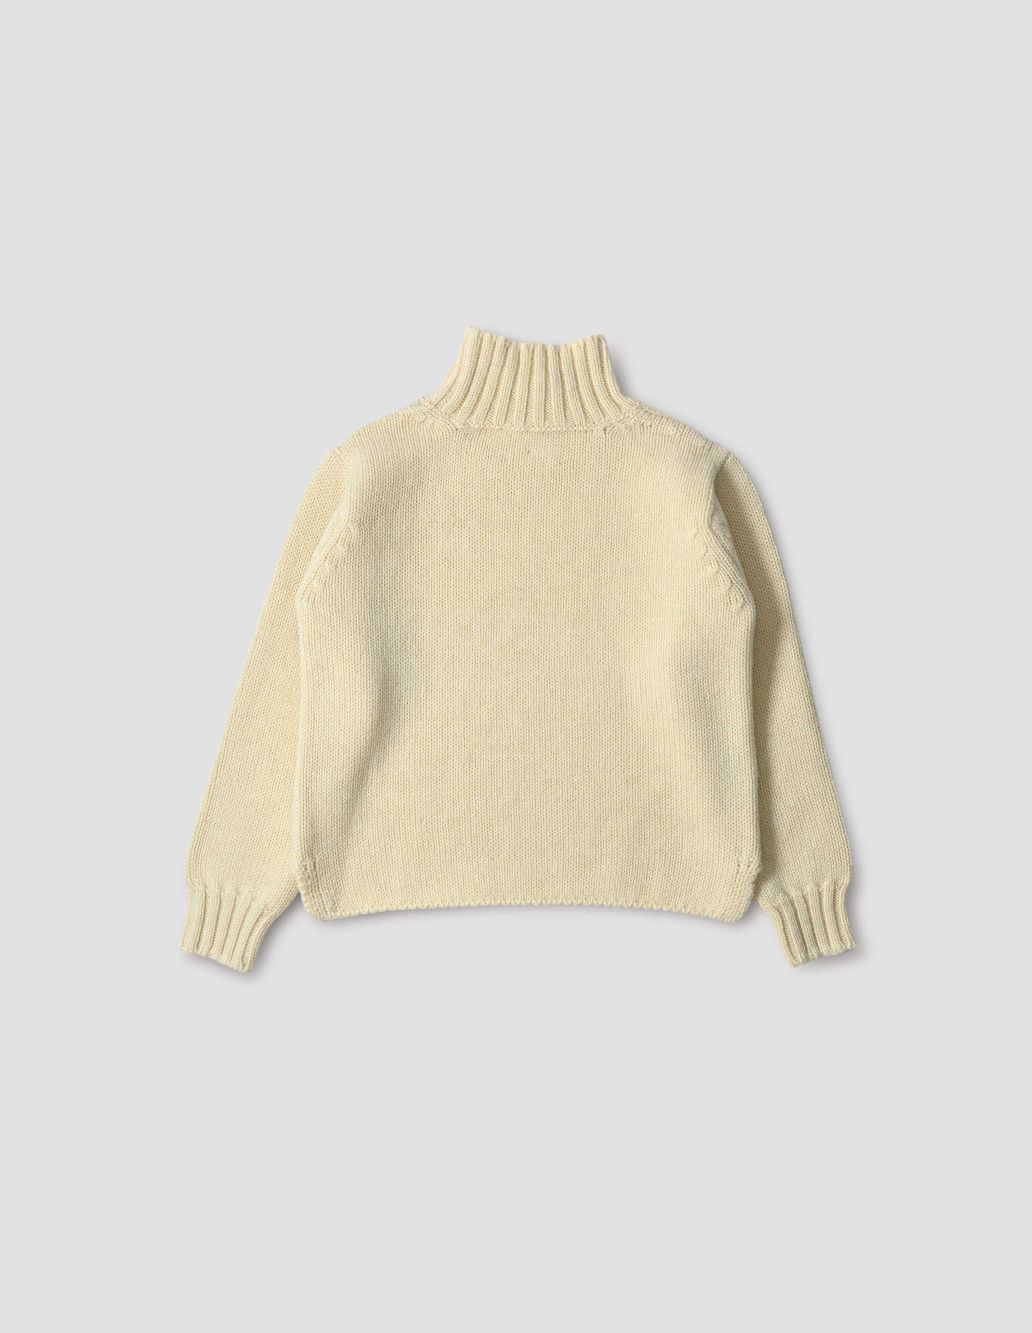 MHL. WIDE NECK SWEATER